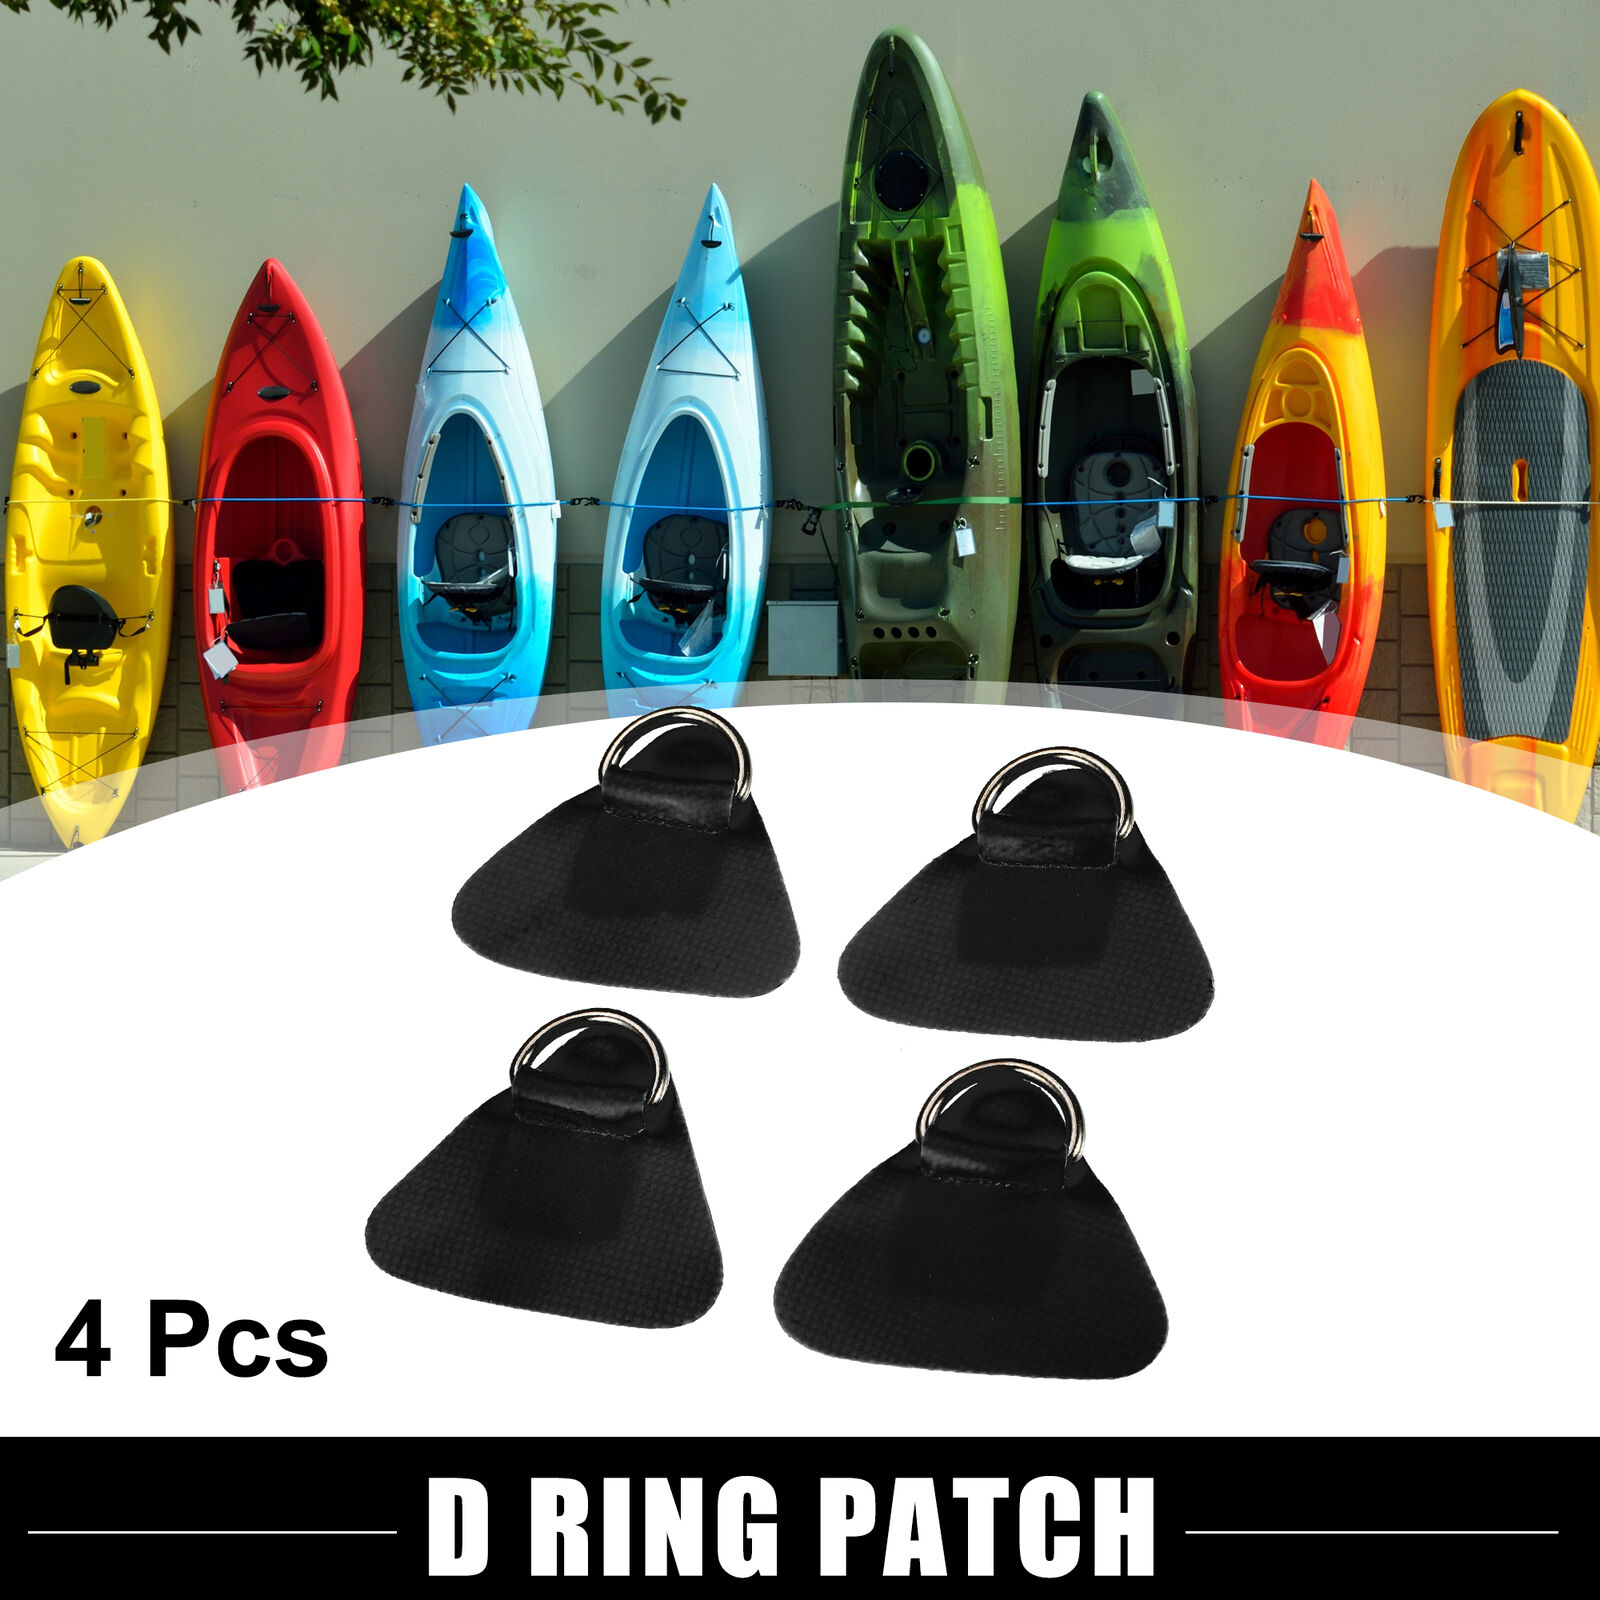 4pcs D Ring Patch PVC Stainless Steel Black for Inflatable Boat Canoe Kayak